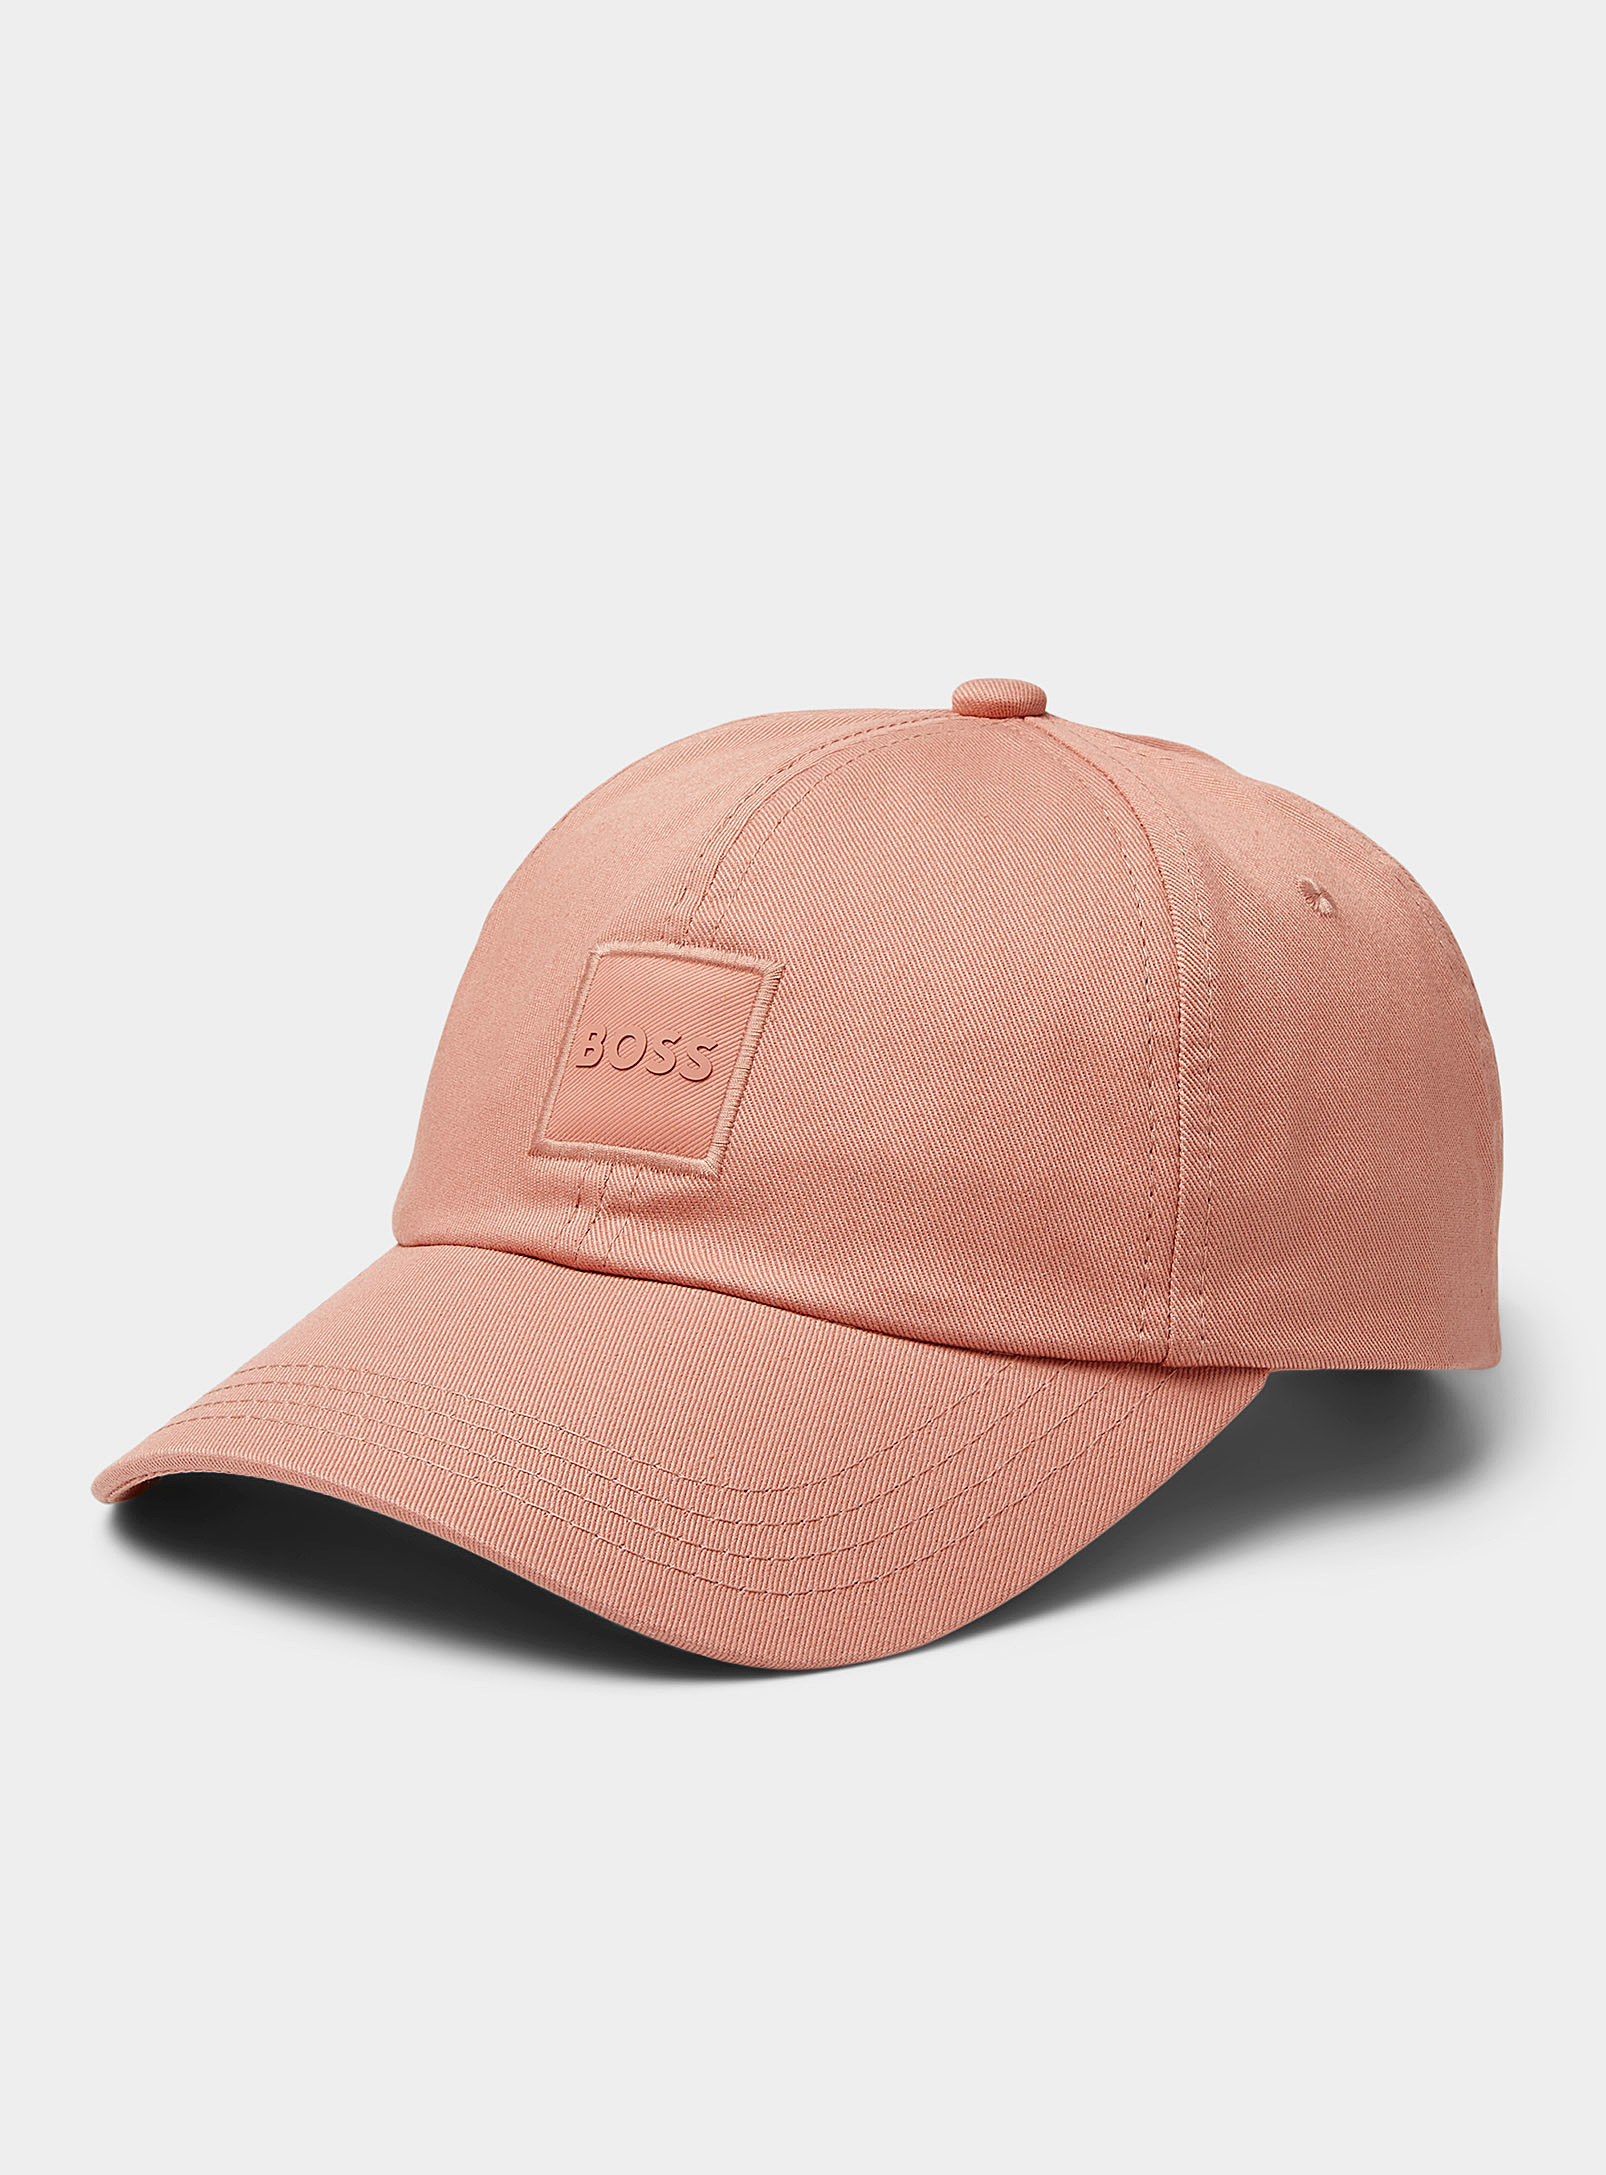 Hugo Boss Embroidered Square Logo Cap In Pink